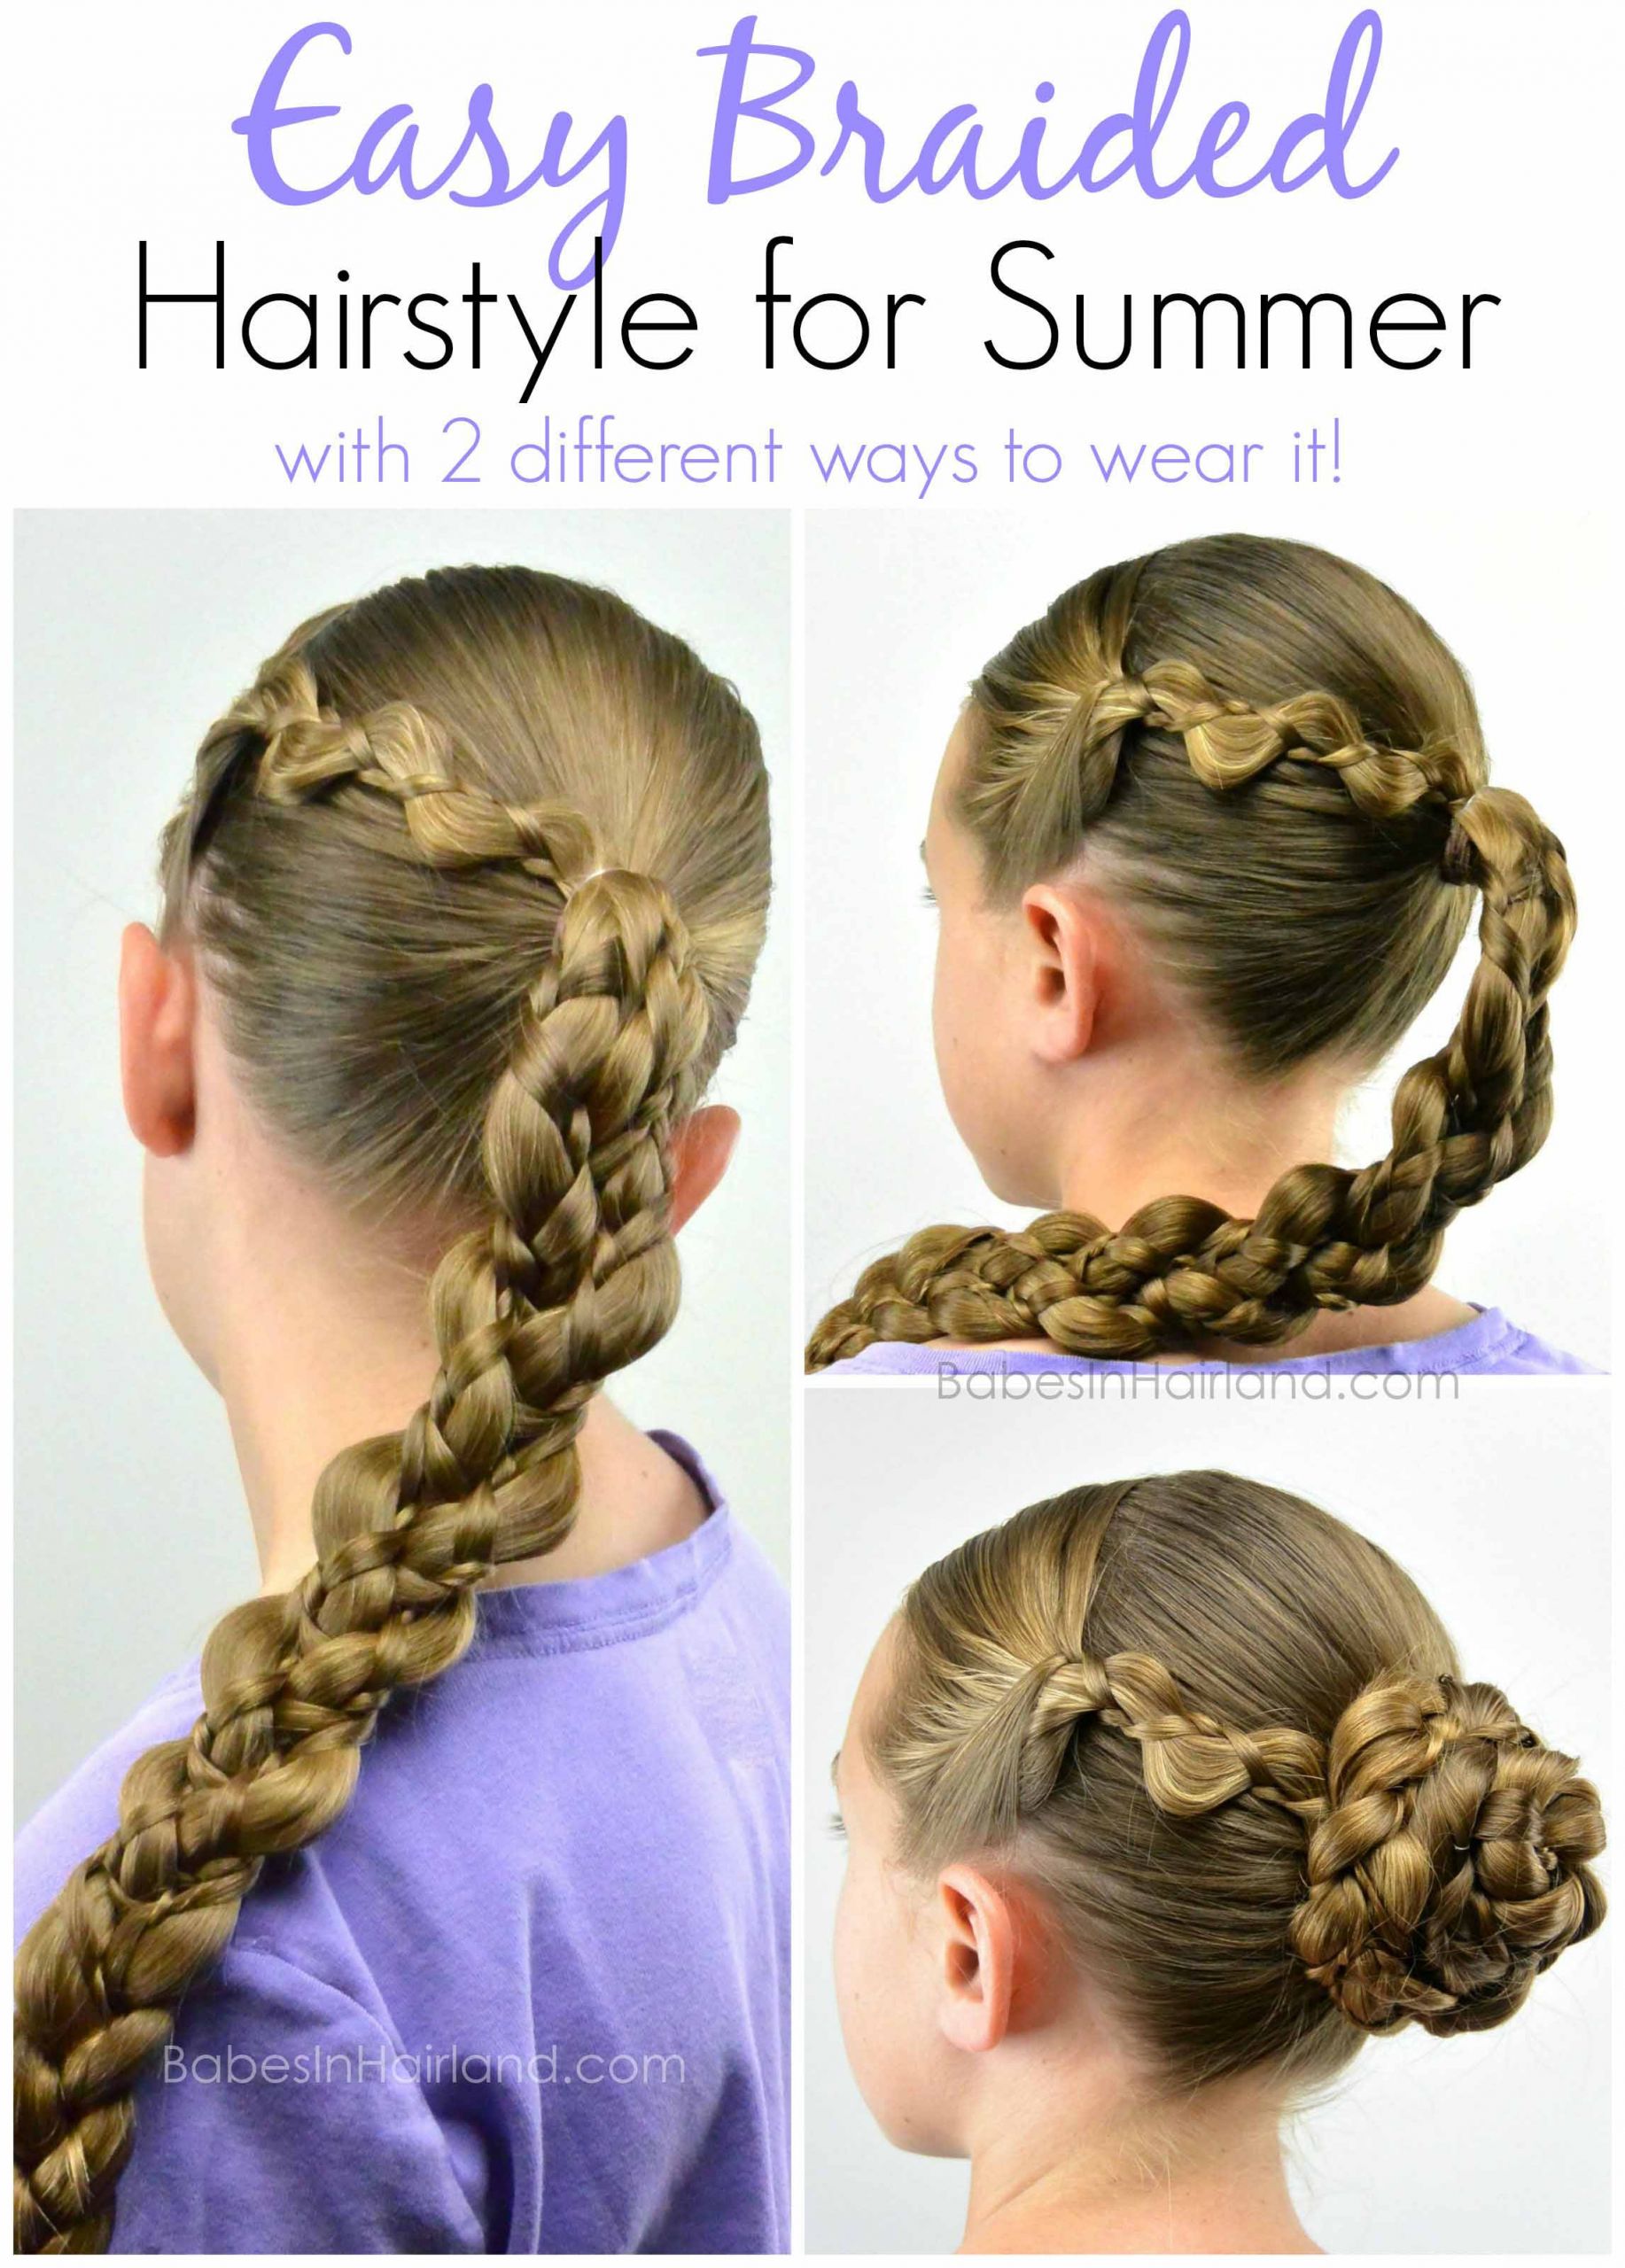 Easy Braid Hairstyles
 Easy Braided Hairstyle for Summer Babes In Hairland